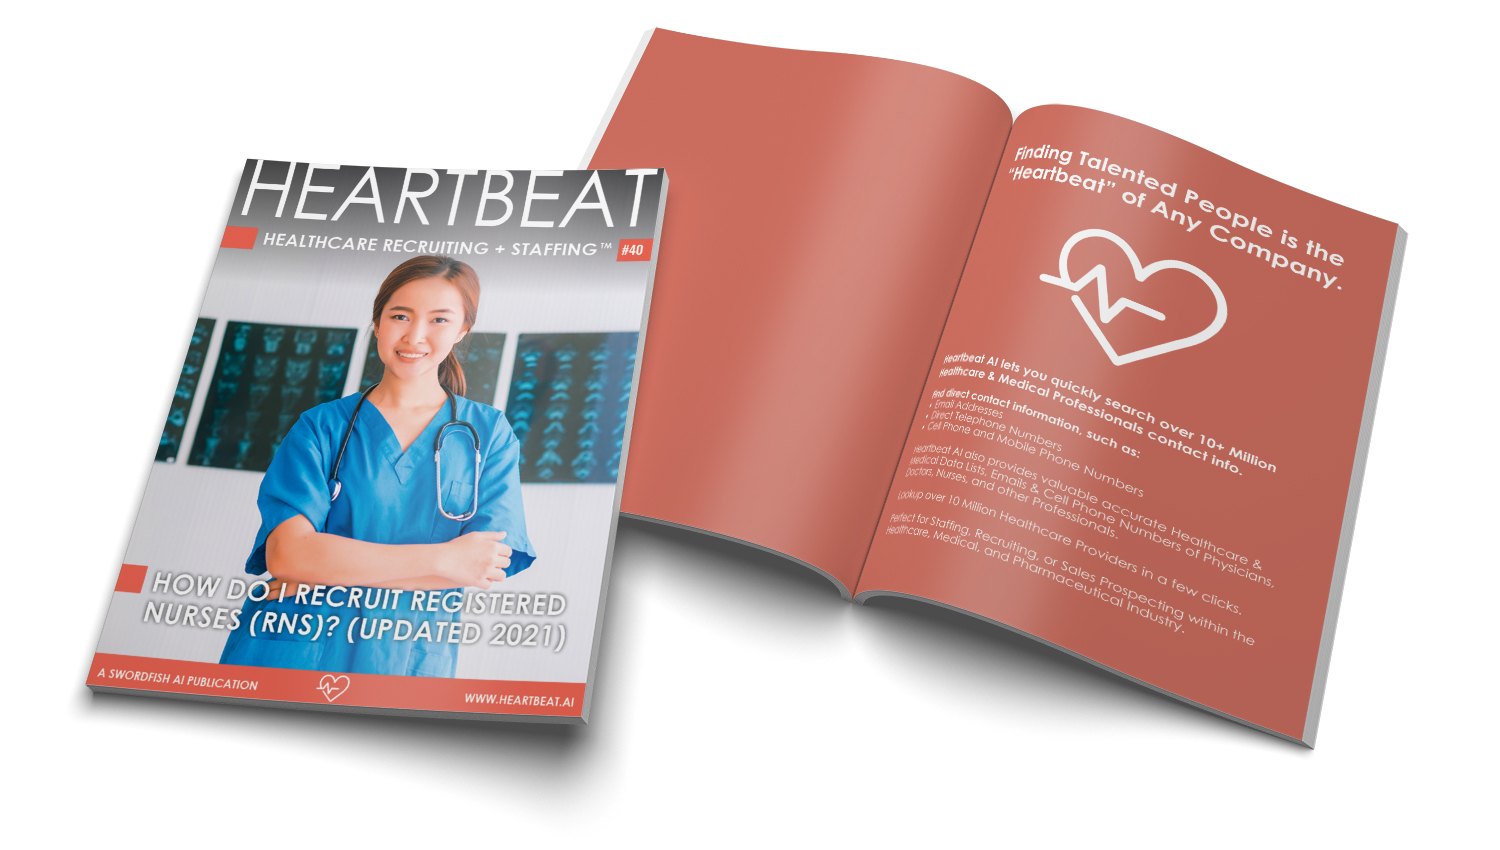 Heartbeat.ai #40 Healthcare Recruiting and Staffing. How do I Recruit Registered Nurses (RNs)? (updated 2021)